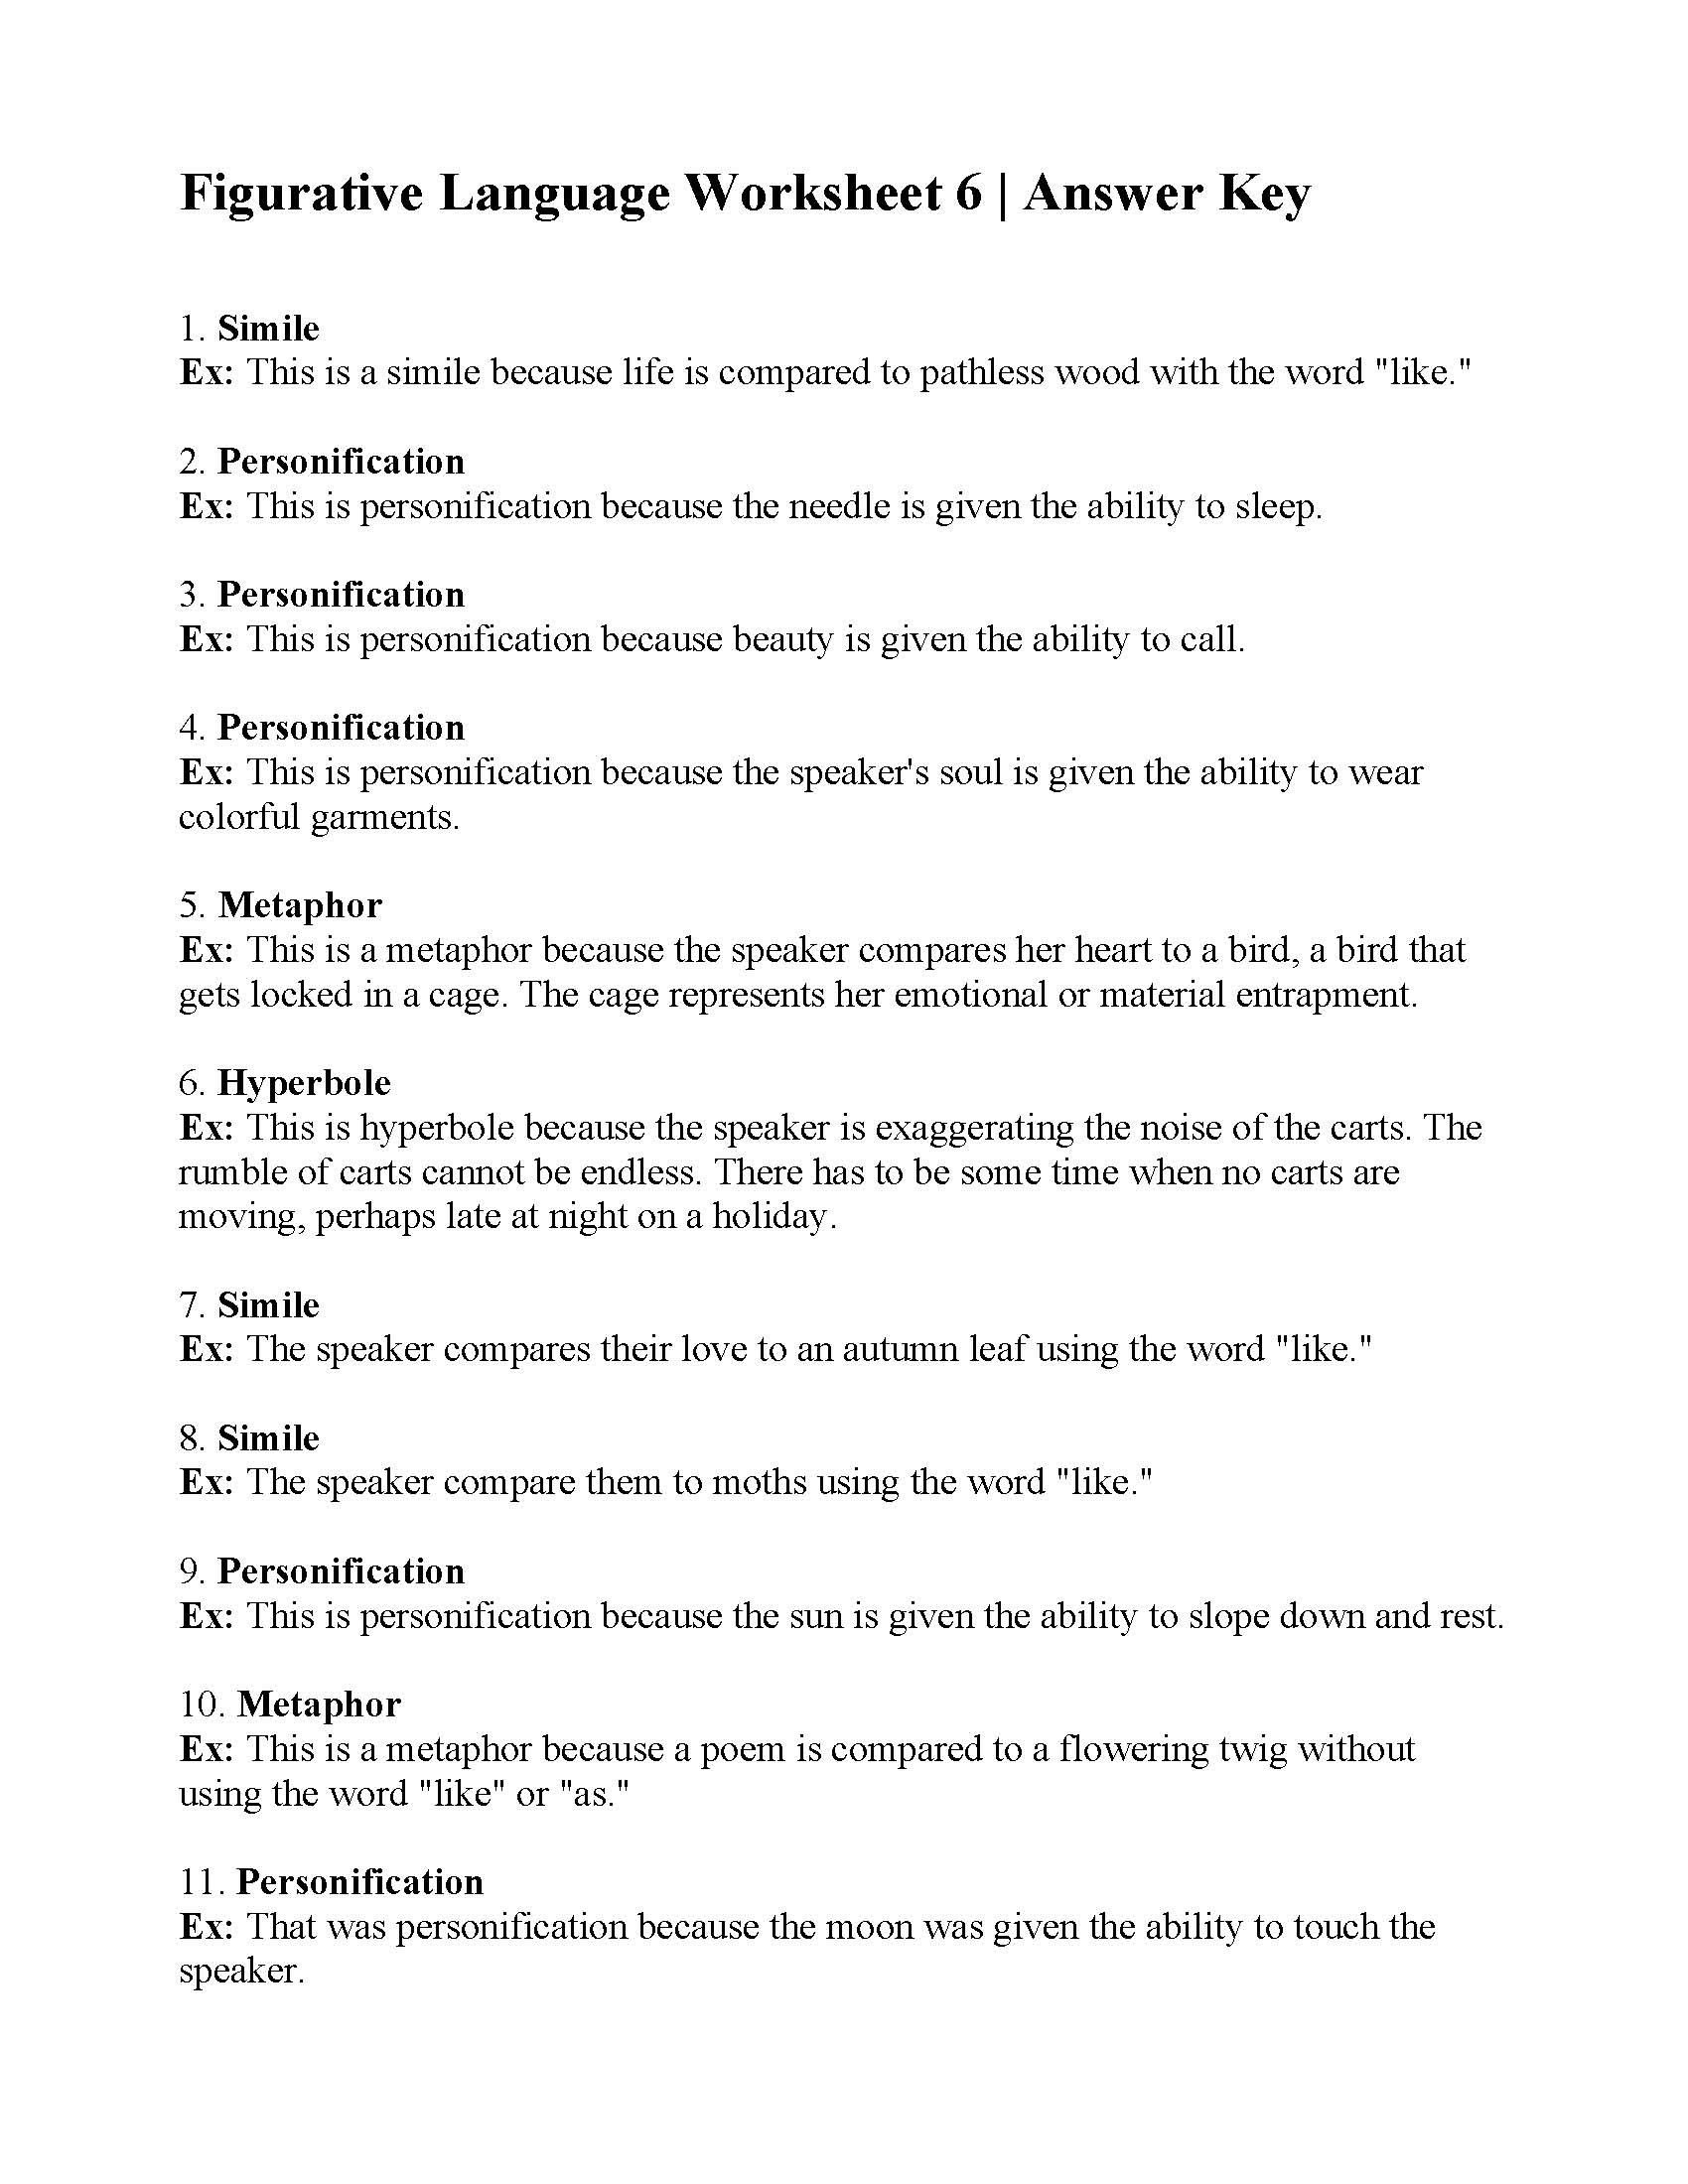 Personification Worksheets 6th Grade Figurative Language Worksheet 6 